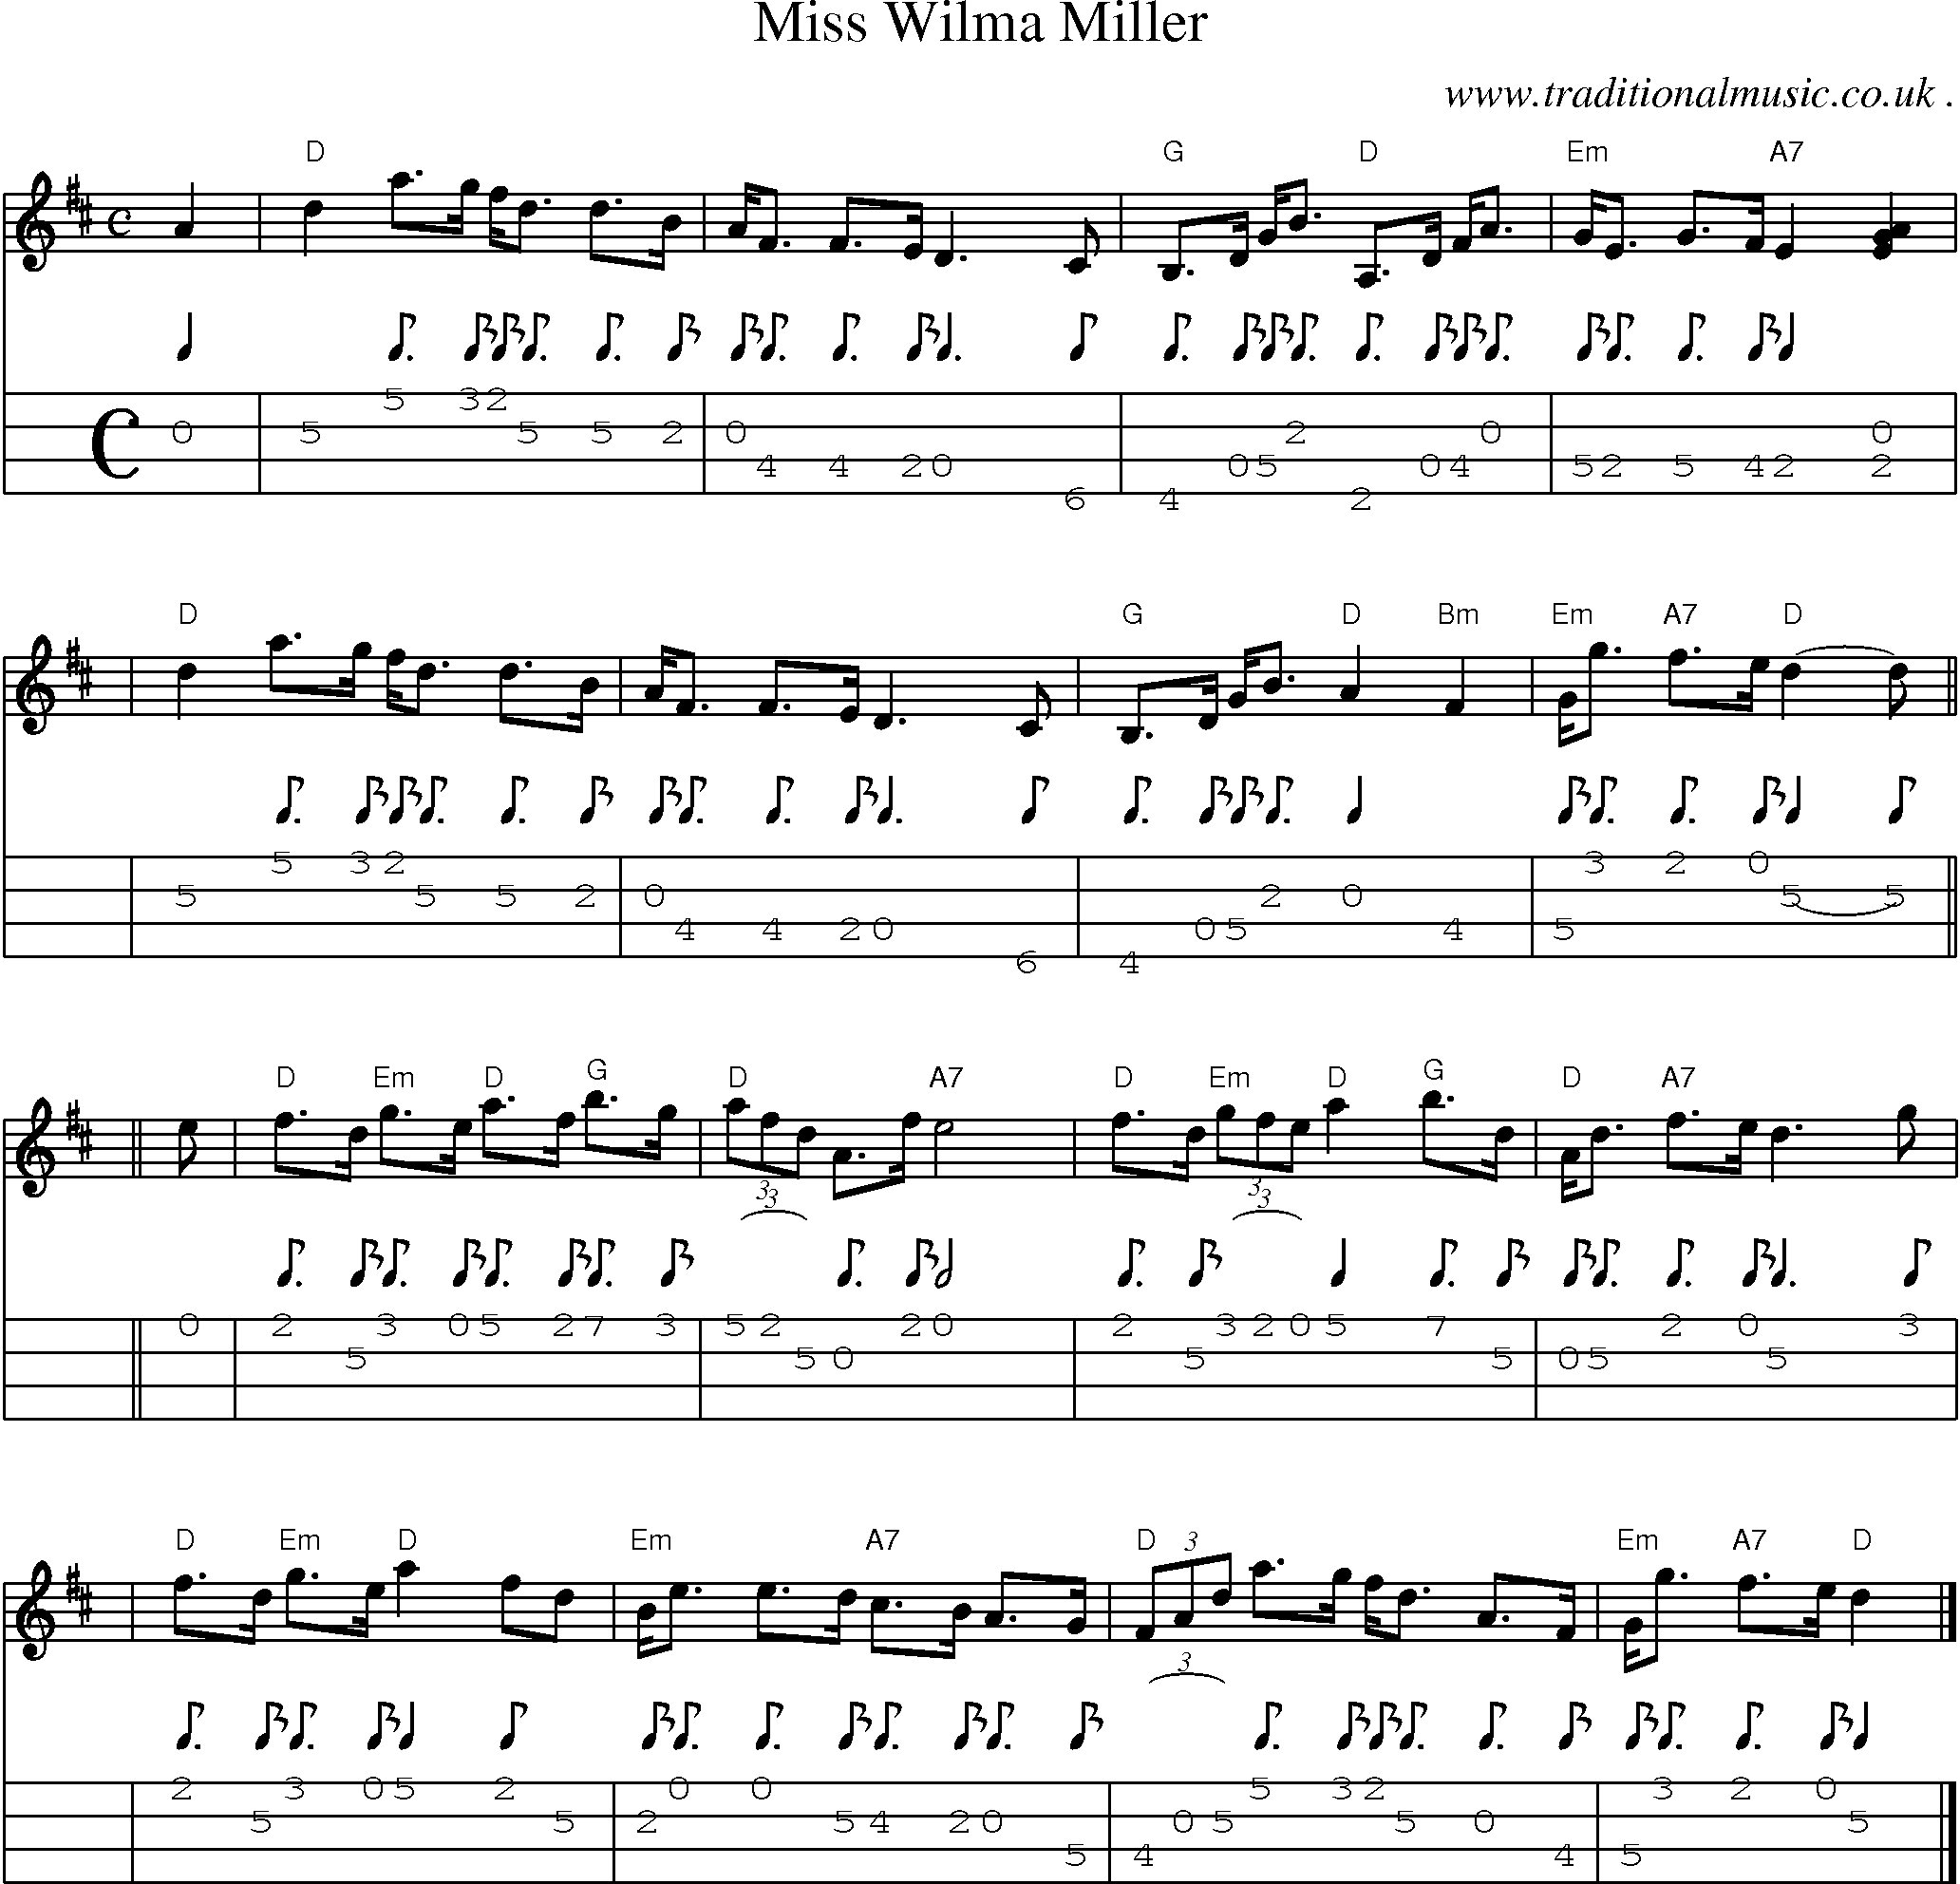 Sheet-music  score, Chords and Mandolin Tabs for Miss Wilma Miller